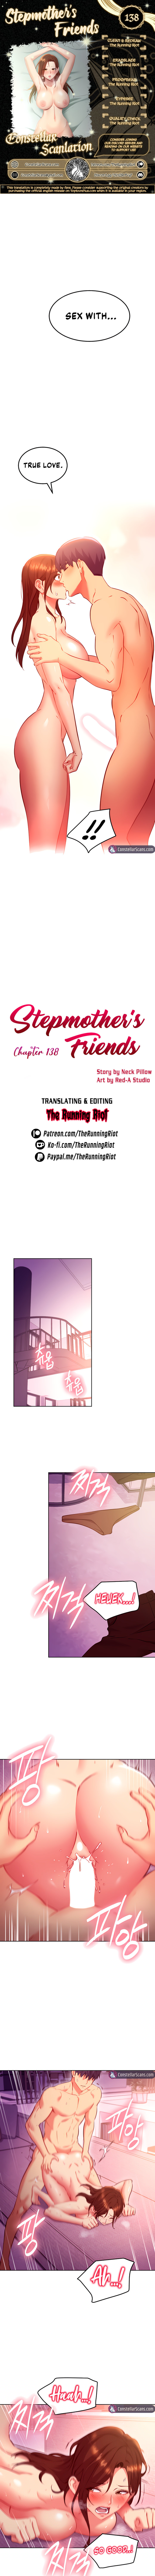 Panel Image 1 for chapter 138 of manhwa Stepmother